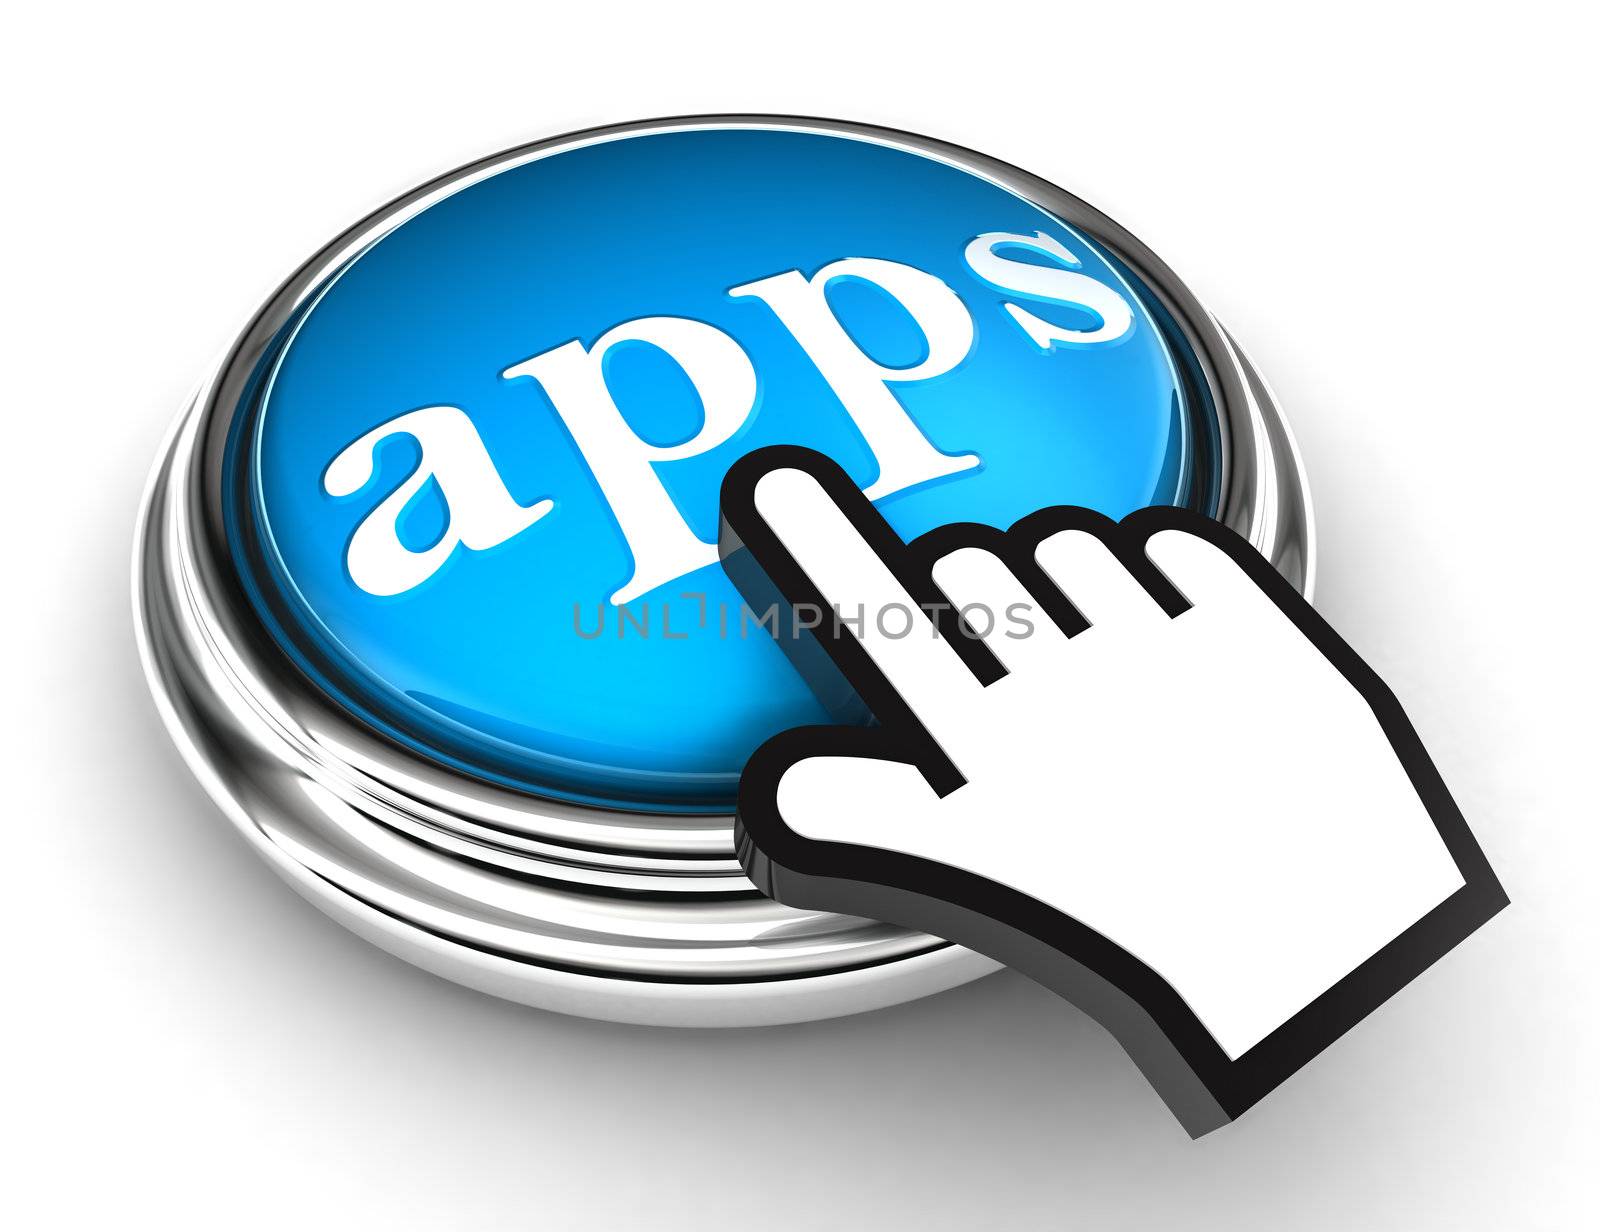 apps blue button and cursor hand on white background. clipping paths included